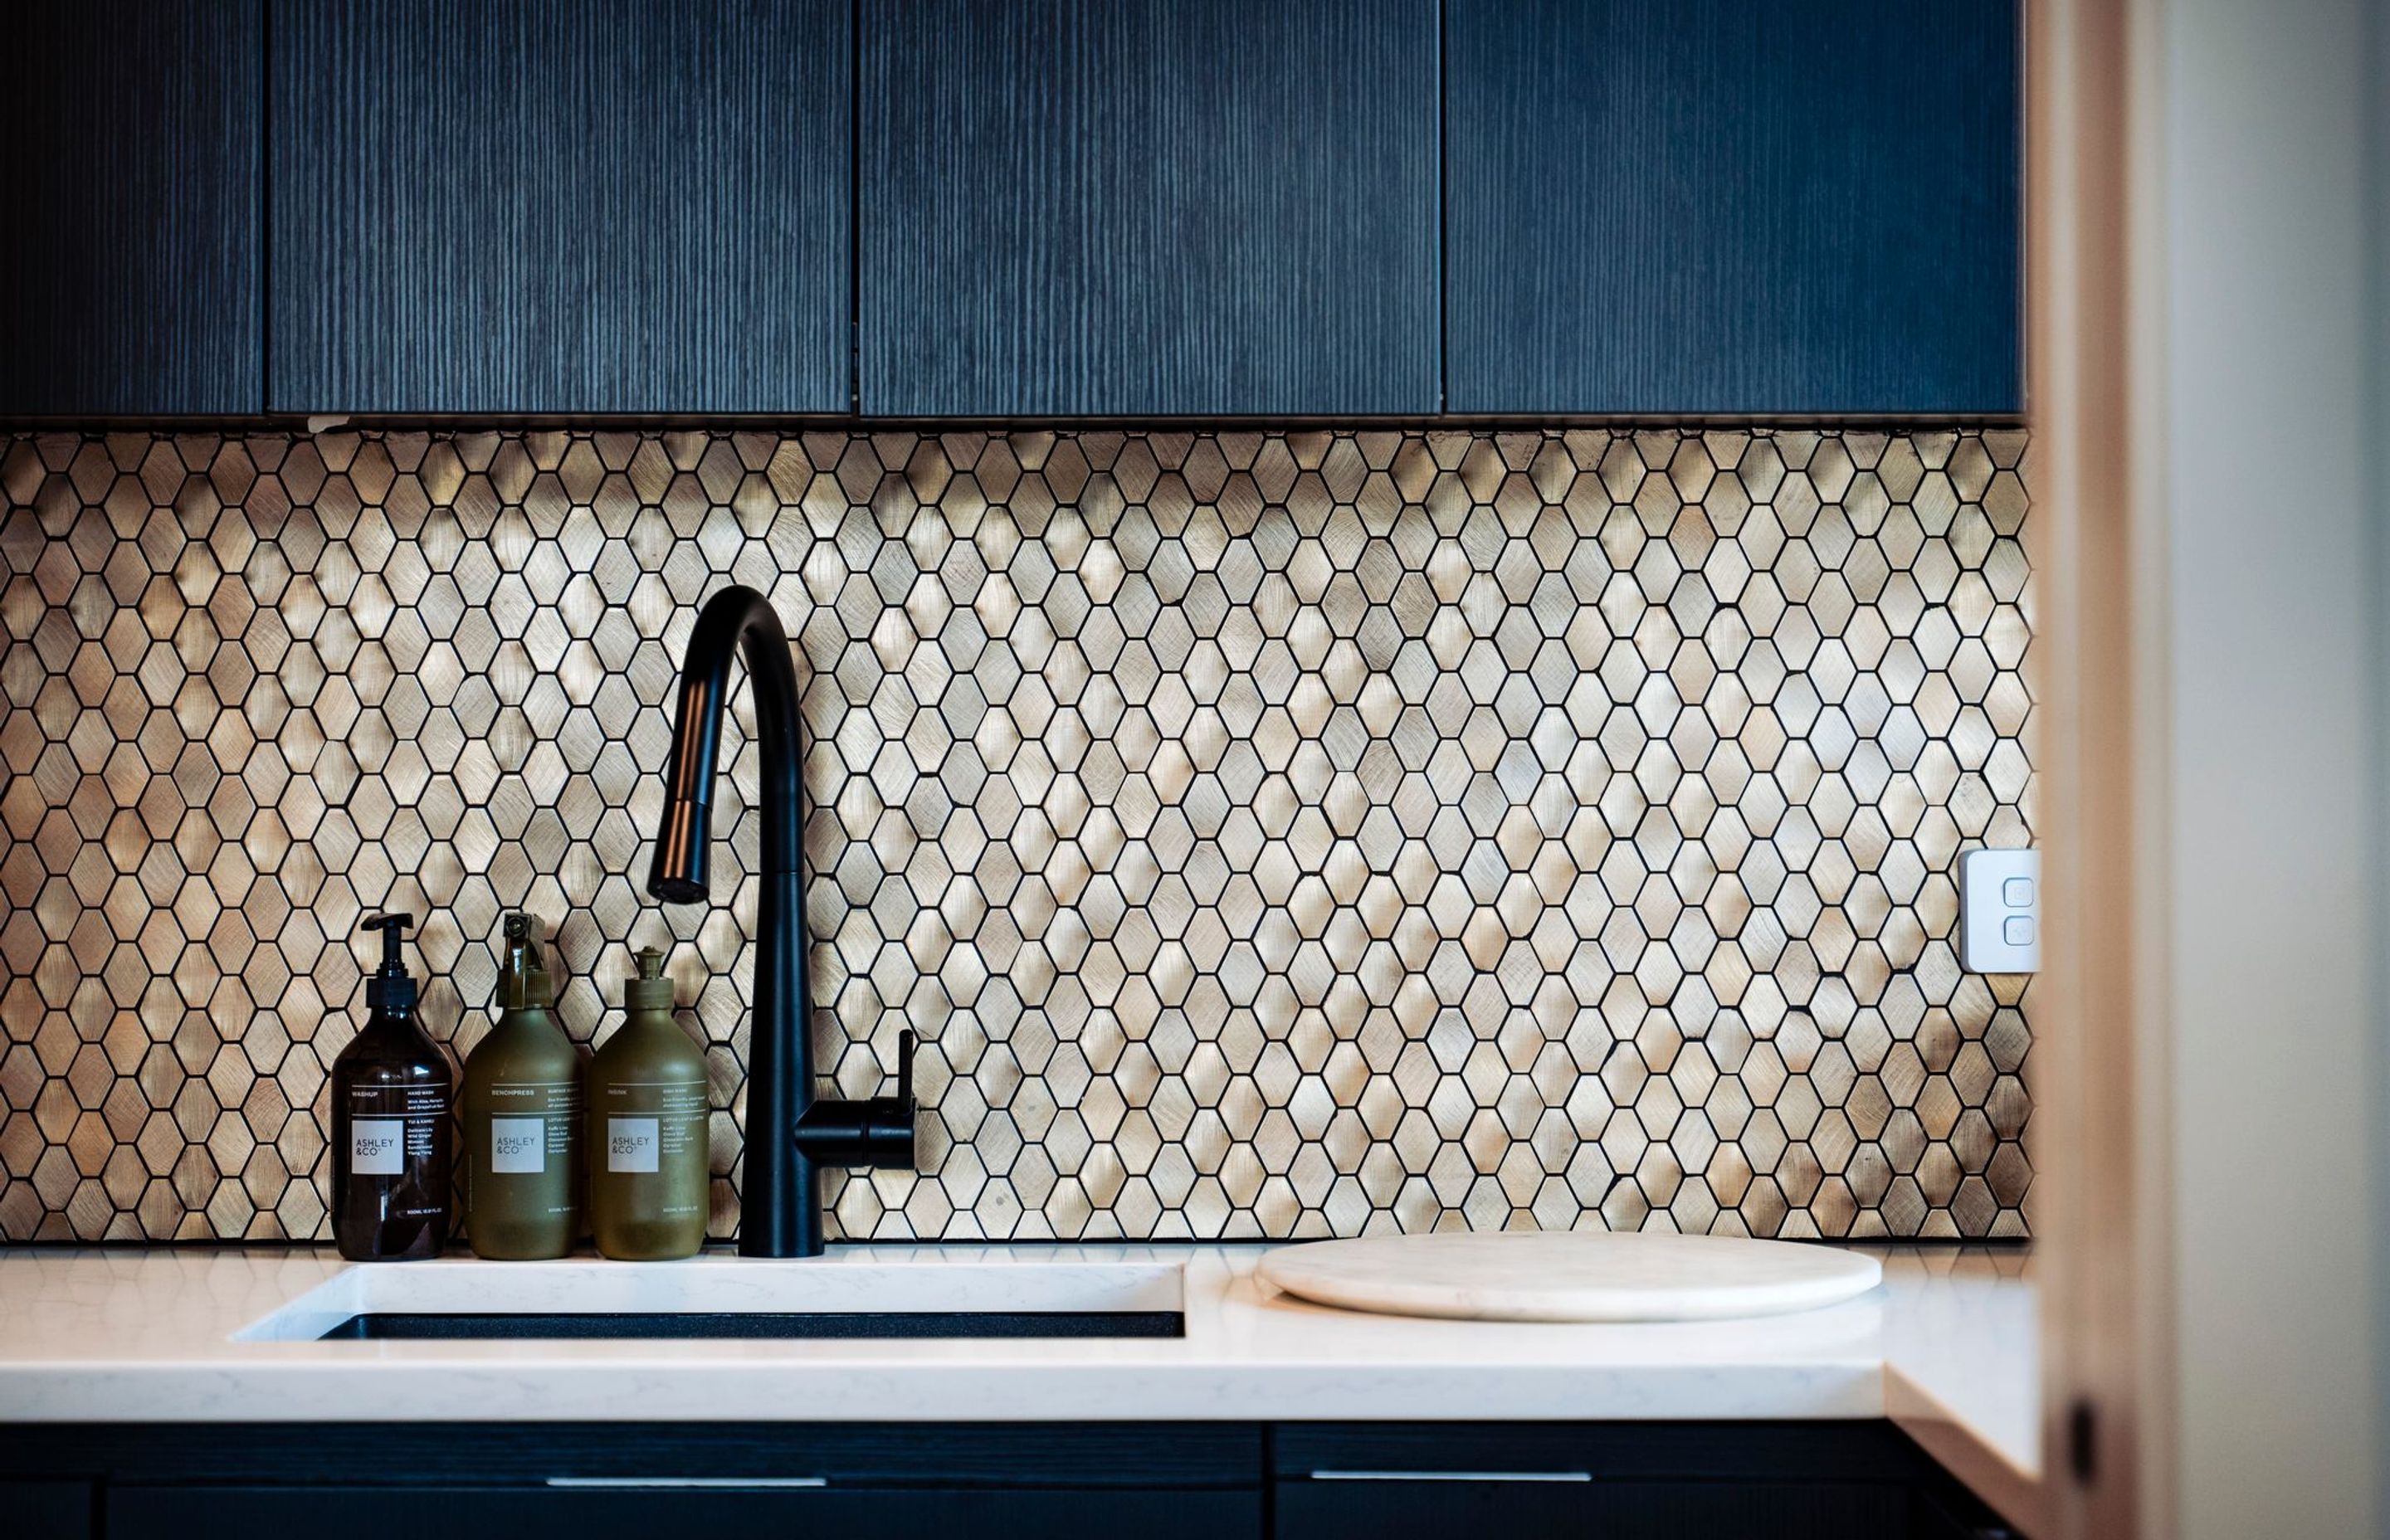 The golden, hexagon-patterned splashback in the scullery brings a touch of luxury.